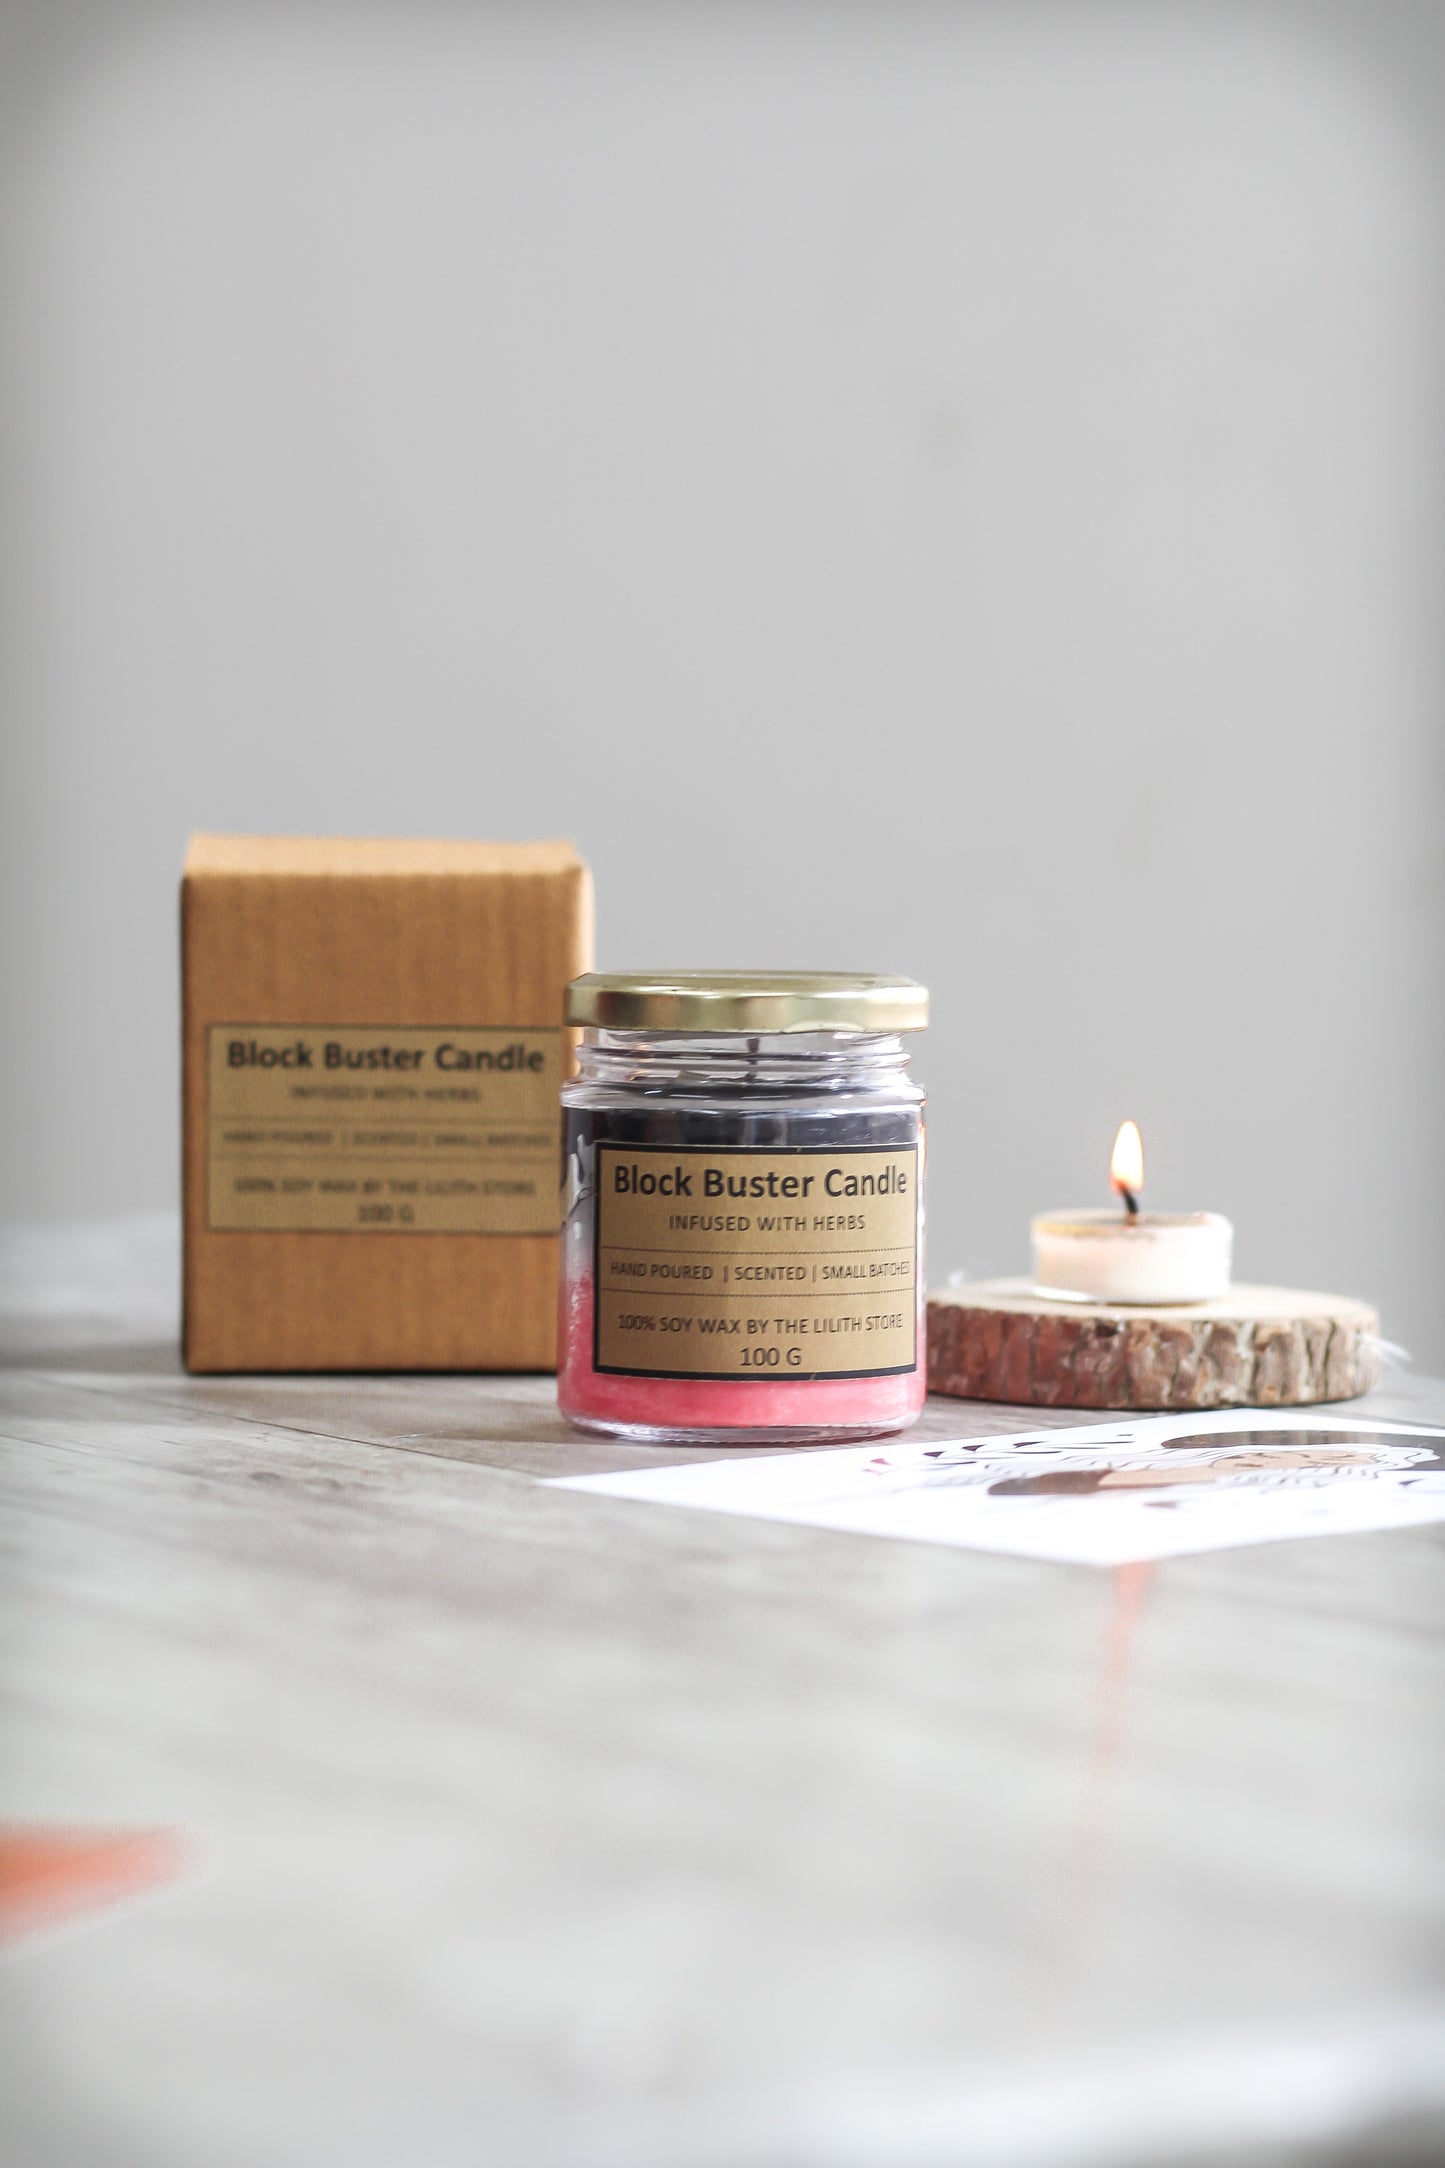 Block Buster Candle - 100 G Soy Wax